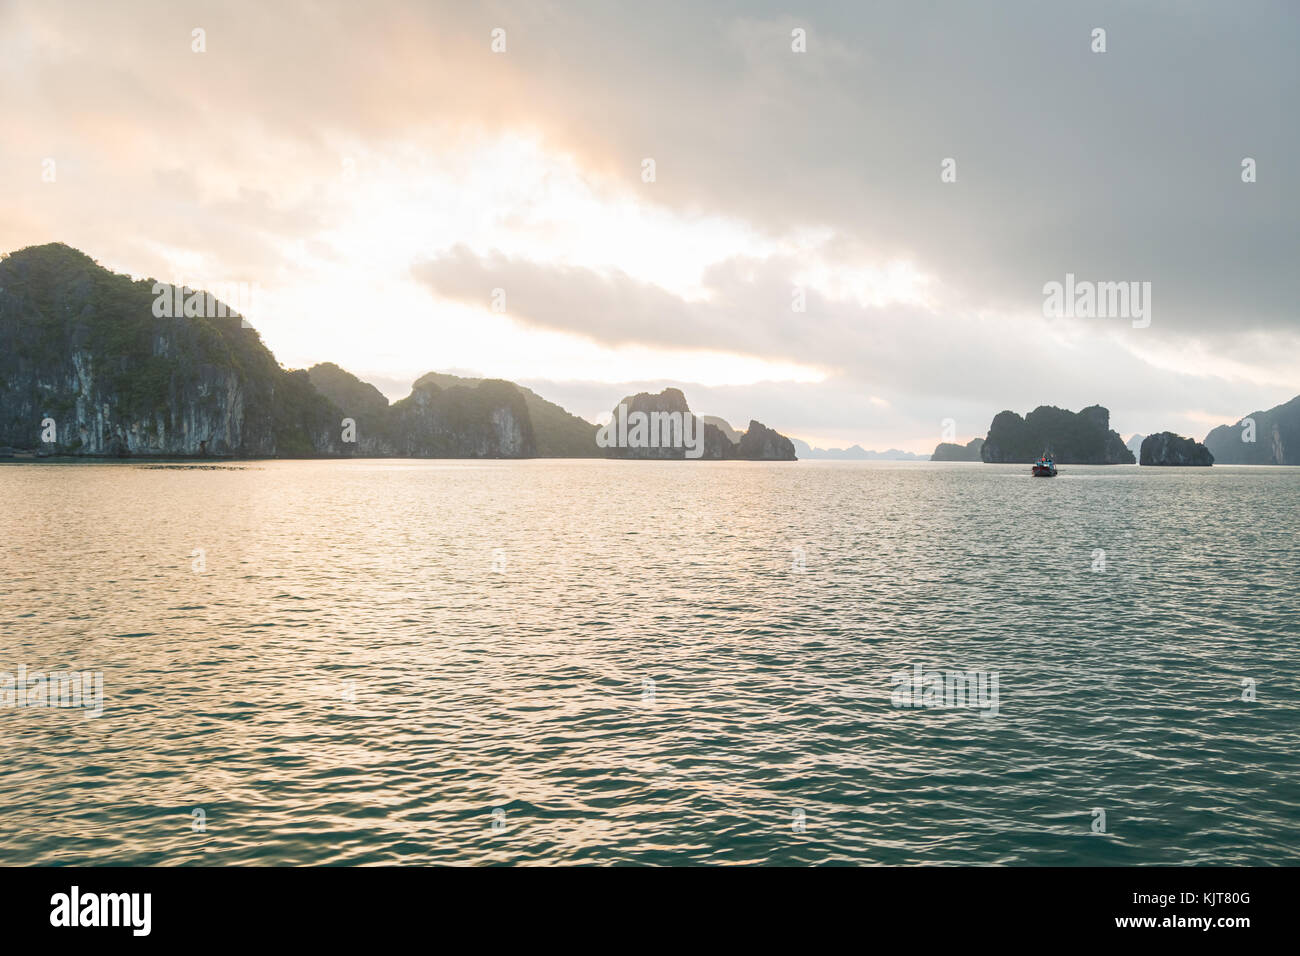 Halong Bay early in the morning with a small boat in the background Stock Photo